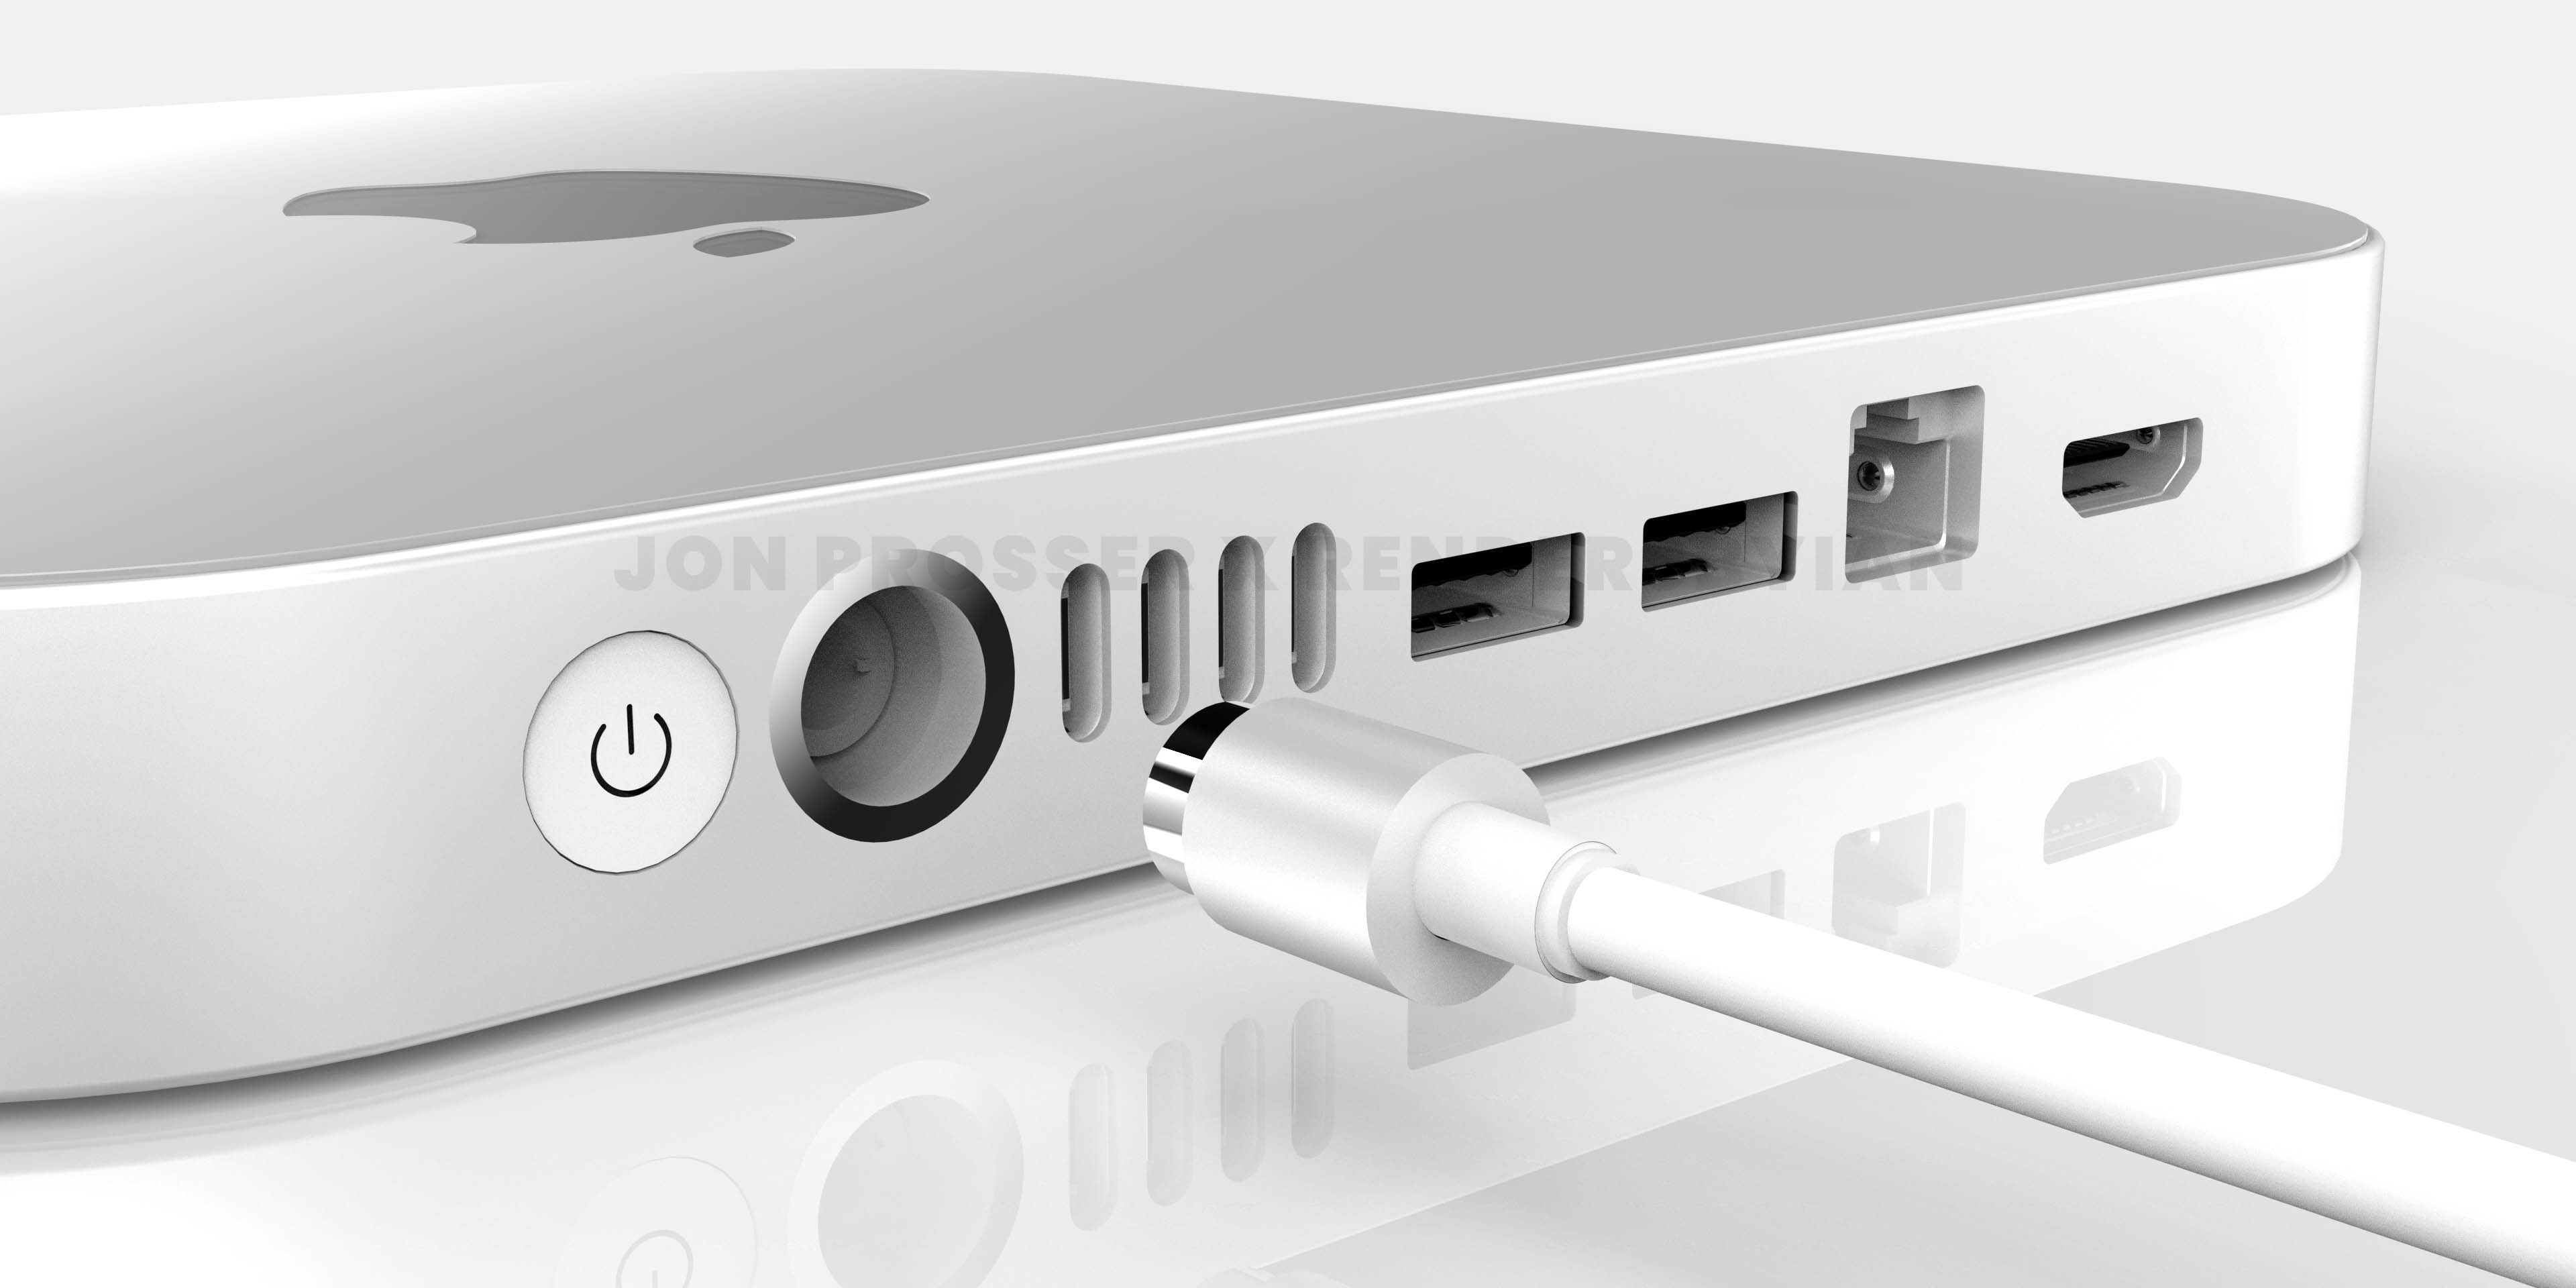 M1X Mac mini reportedly to feature thinner chassis redesign, use 